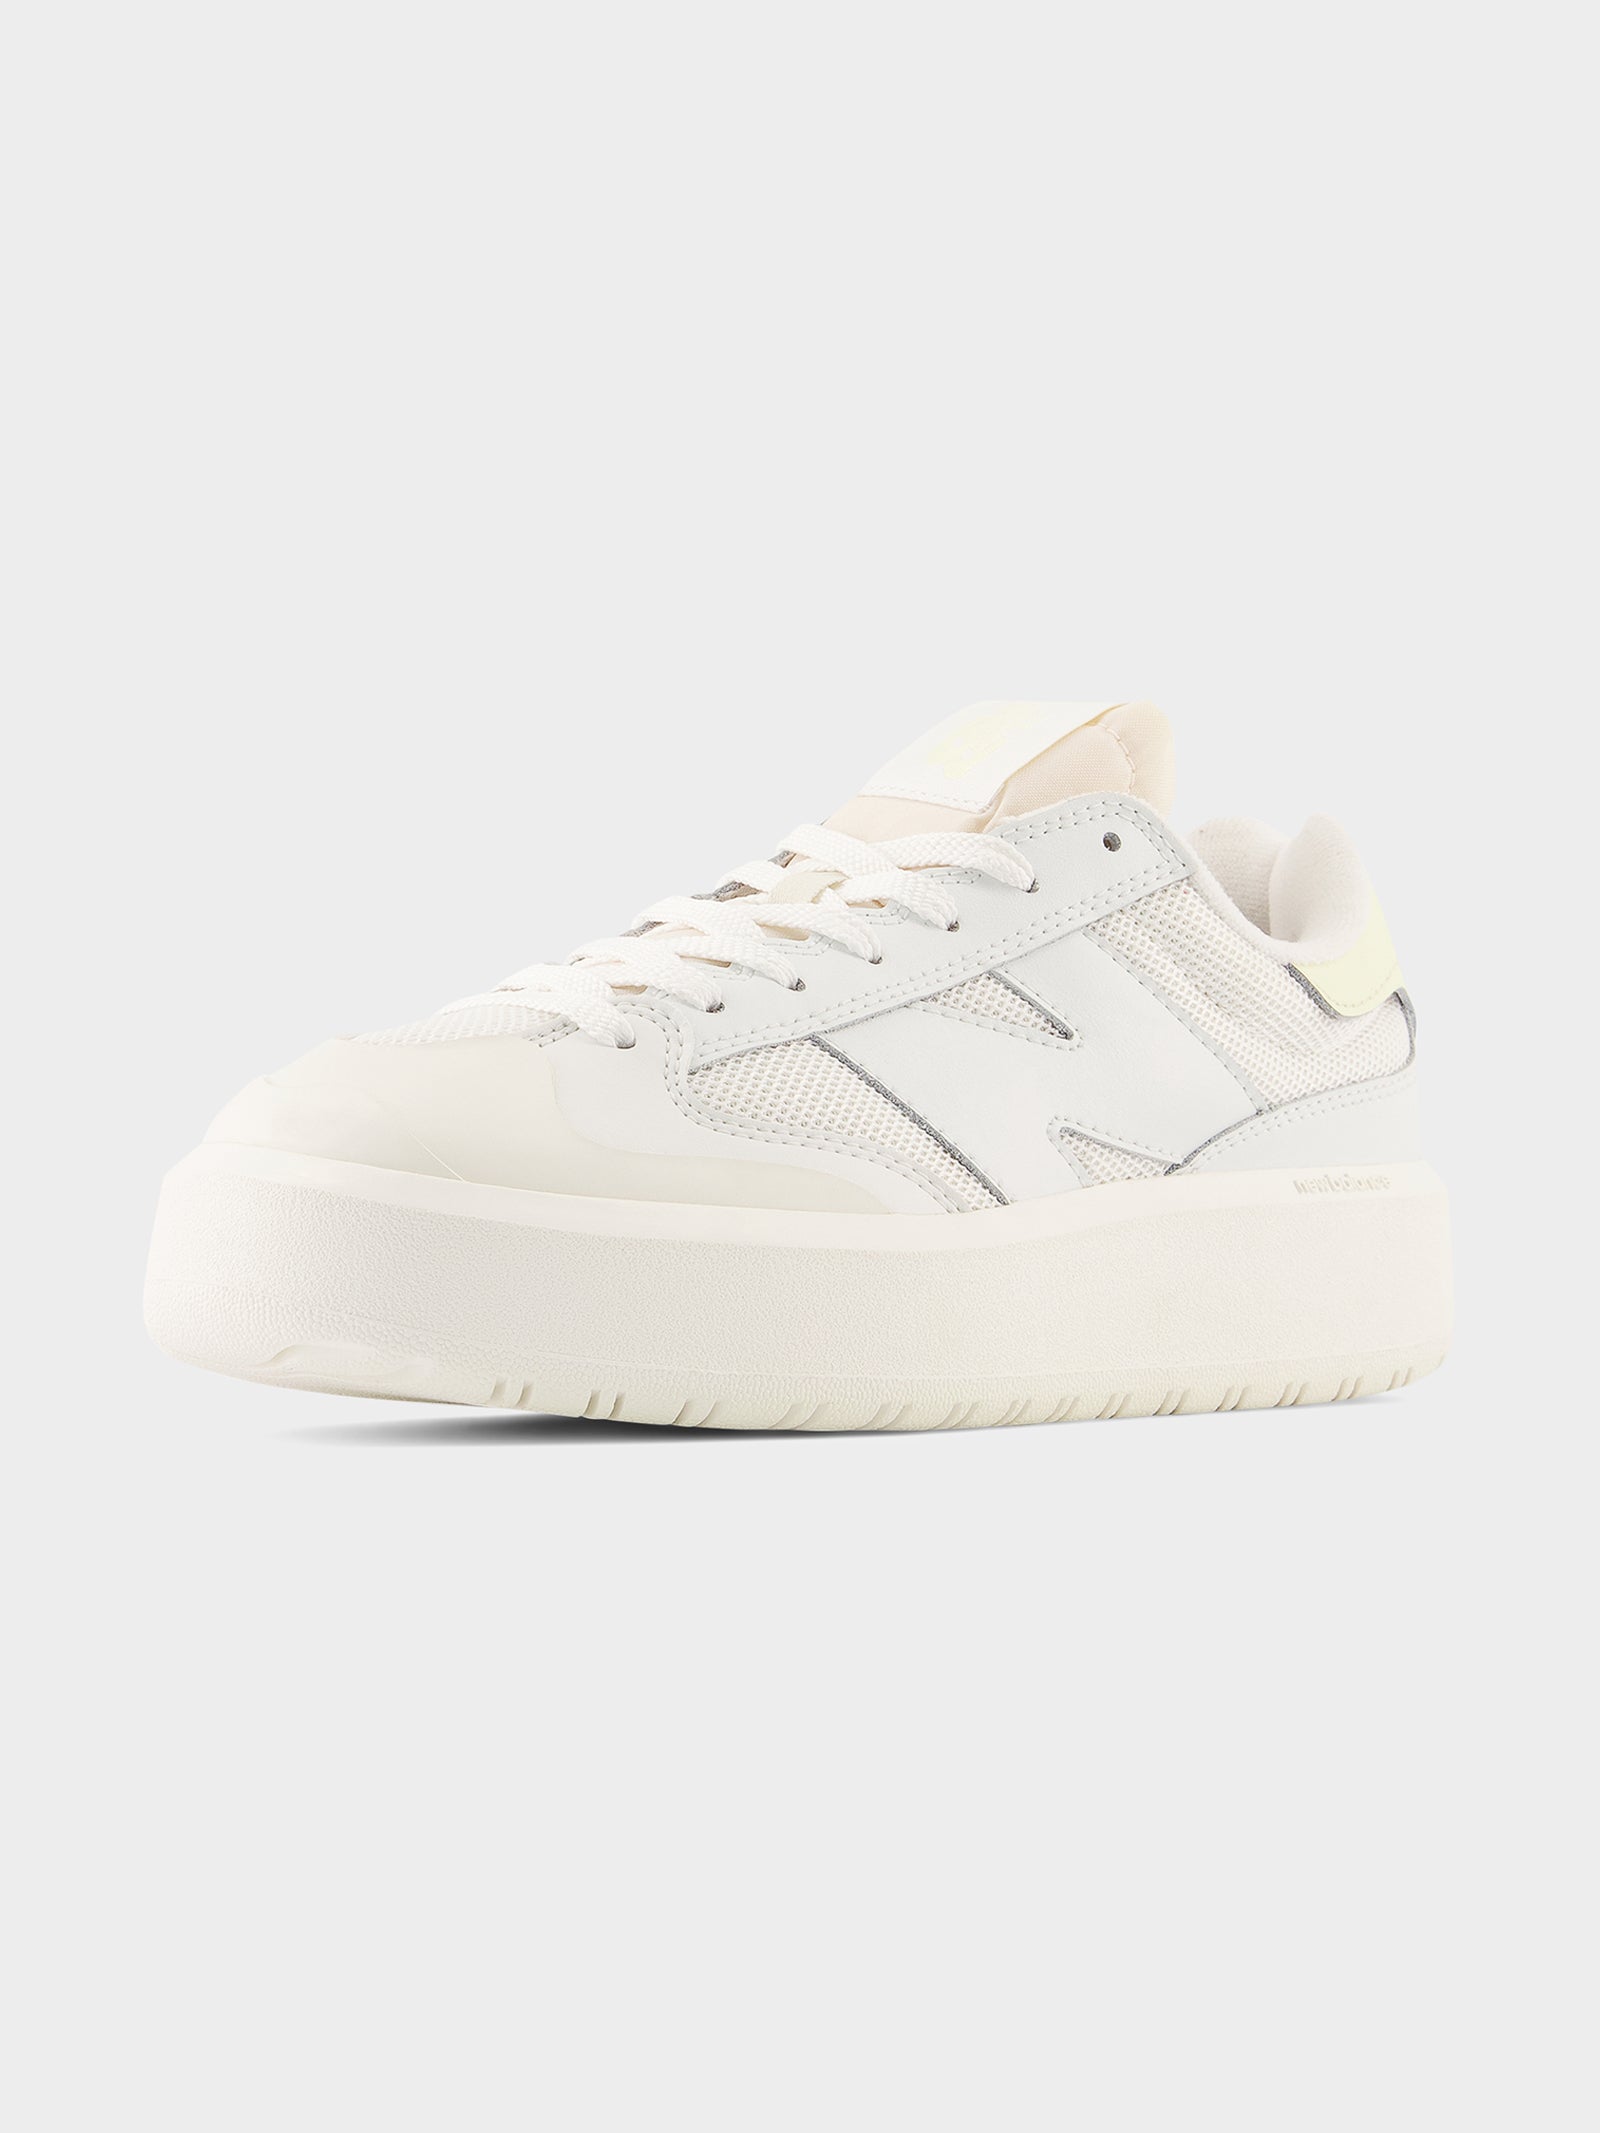 Unisex CT302 Sneakers in Off White